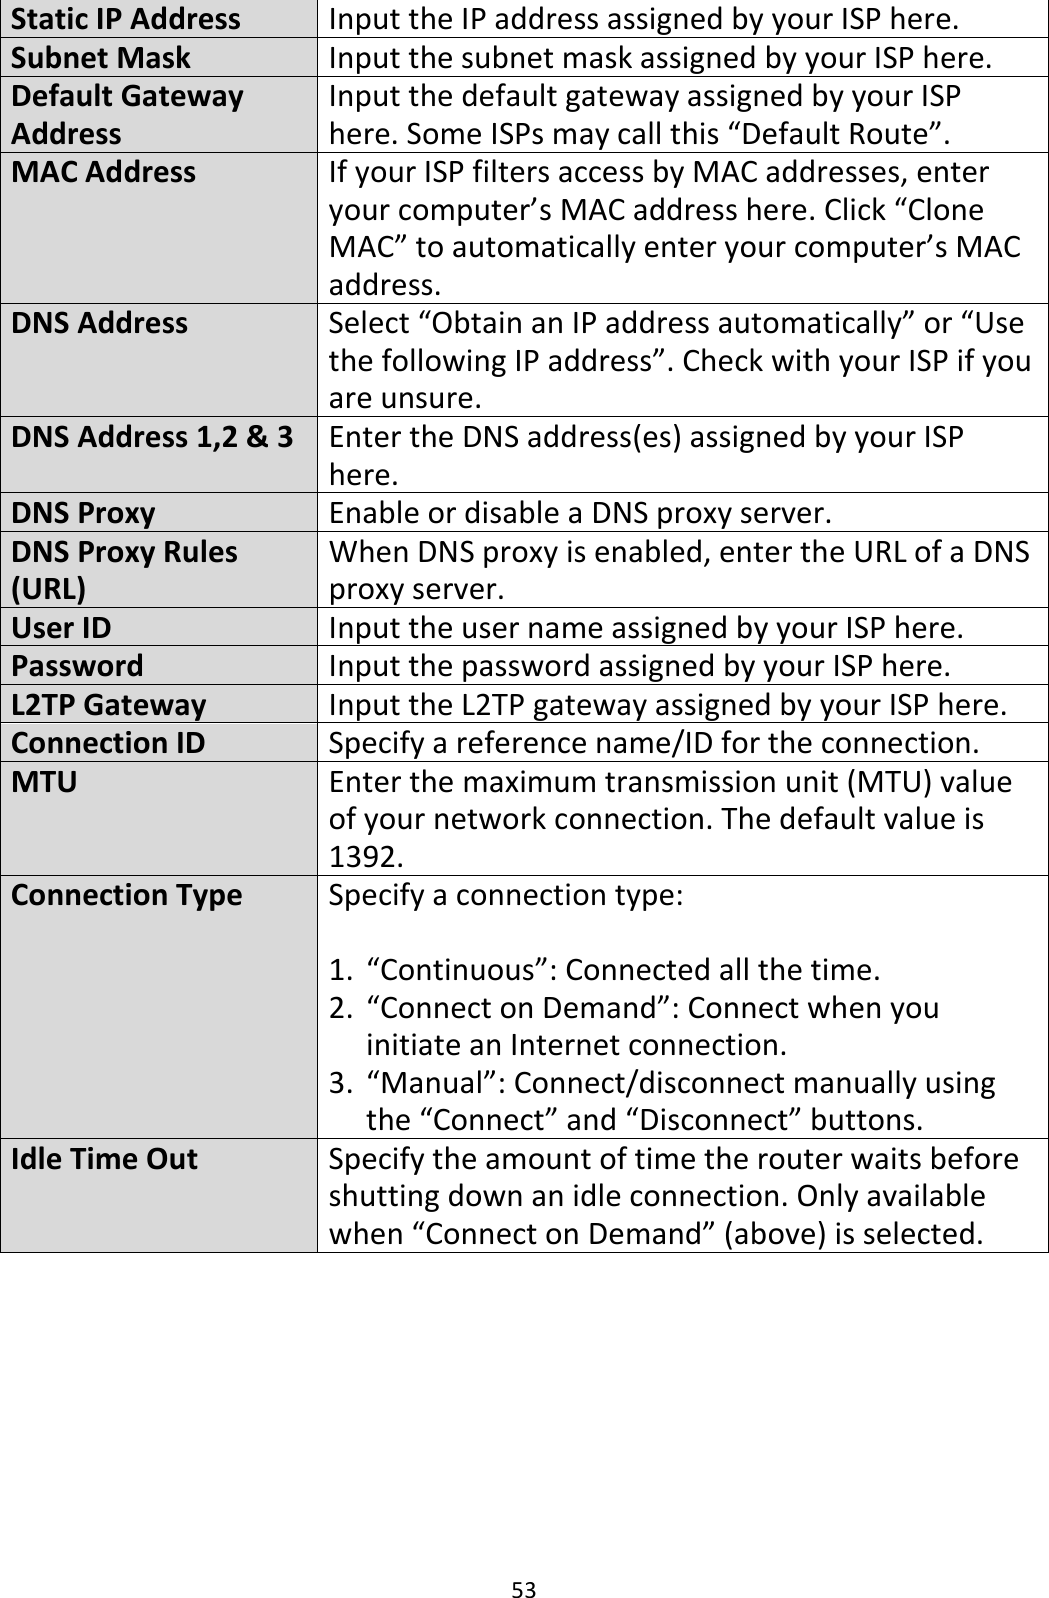 53 Static IP Address Input the IP address assigned by your ISP here. Subnet Mask Input the subnet mask assigned by your ISP here. Default Gateway Address Input the default gateway assigned by your ISP here. Some ISPs may call this “Default Route”. MAC Address If your ISP filters access by MAC addresses, enter your computer’s MAC address here. Click “Clone MAC” to automatically enter your computer’s MAC address. DNS Address Select “Obtain an IP address automatically” or “Use the following IP address”. Check with your ISP if you are unsure. DNS Address 1,2 &amp; 3 Enter the DNS address(es) assigned by your ISP here. DNS Proxy Enable or disable a DNS proxy server. DNS Proxy Rules (URL) When DNS proxy is enabled, enter the URL of a DNS proxy server. User ID Input the user name assigned by your ISP here. Password Input the password assigned by your ISP here. L2TP Gateway Input the L2TP gateway assigned by your ISP here. Connection ID Specify a reference name/ID for the connection. MTU Enter the maximum transmission unit (MTU) value of your network connection. The default value is 1392. Connection Type Specify a connection type:  1. “Continuous”: Connected all the time. 2. “Connect on Demand”: Connect when you initiate an Internet connection. 3. “Manual”: Connect/disconnect manually using the “Connect” and “Disconnect” buttons. Idle Time Out Specify the amount of time the router waits before shutting down an idle connection. Only available when “Connect on Demand” (above) is selected.  